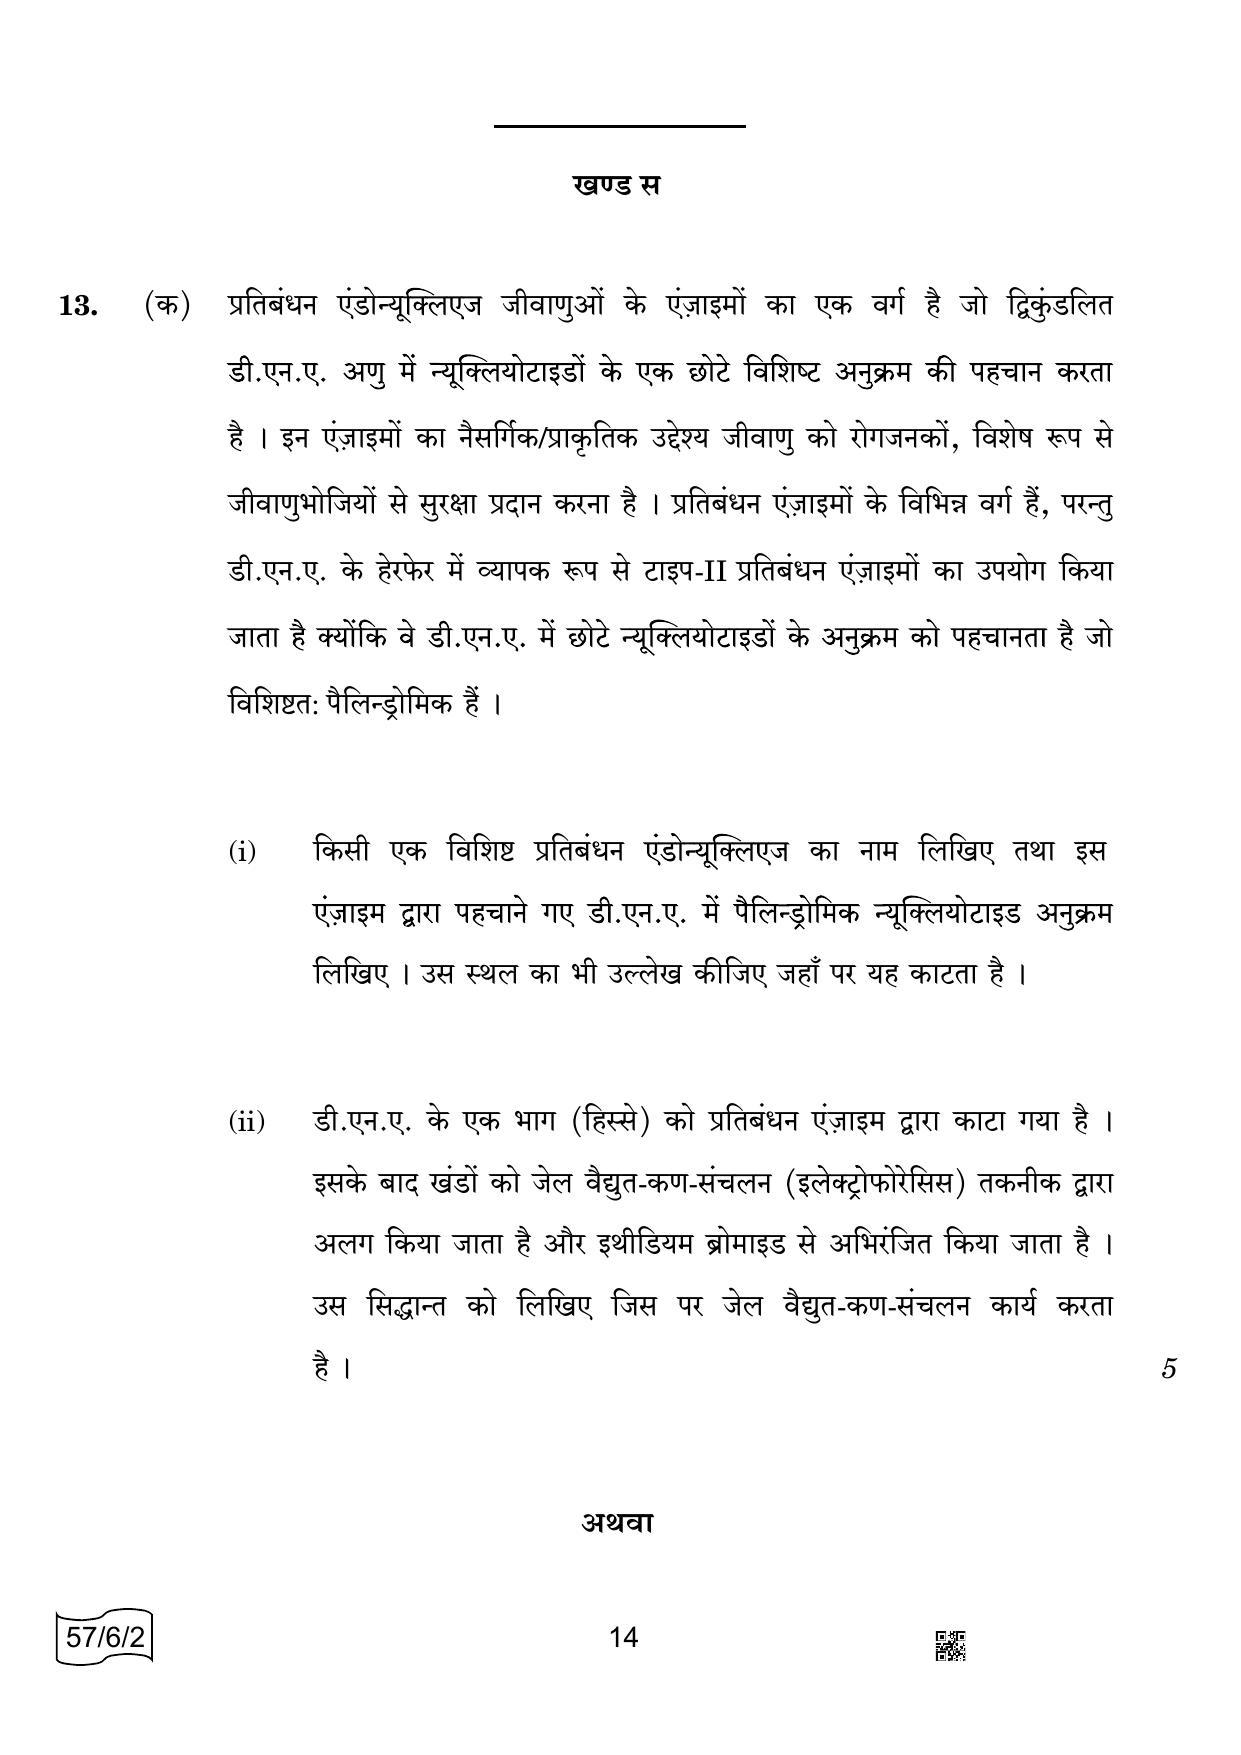 CBSE Class 12 57-6-2 BIOLOGY 2022 Compartment Question Paper - Page 14